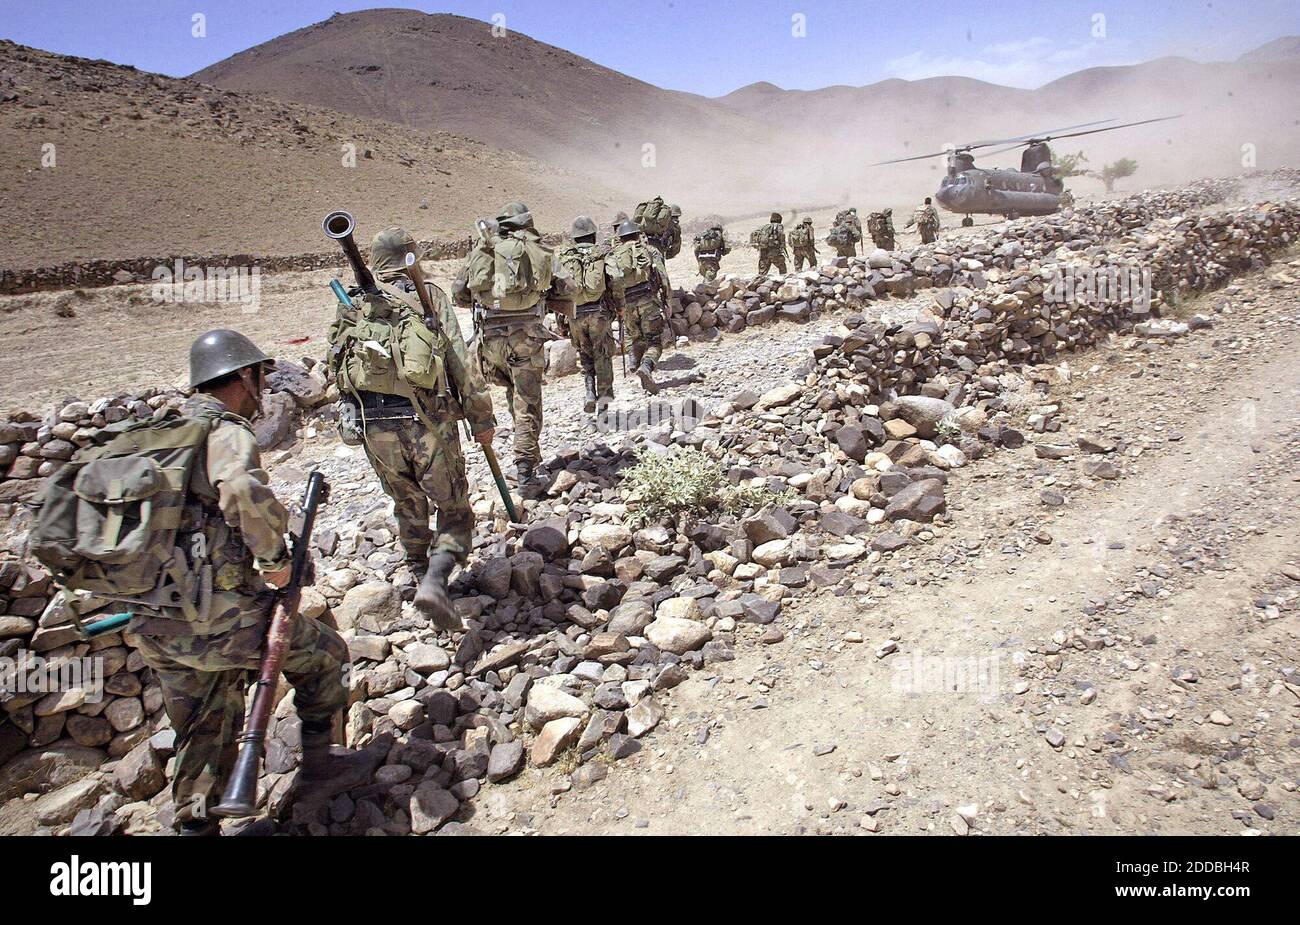 NO FILM, NO VIDEO, NO TV, NO DOCUMENTARY - Operation Como in the Deh Chopan District of Zabul Province, Afghanistan, on August 10, 2005. Photo by Tom Pennington/Fort Worth Star-Telegram/KRT/ABACAPRESS.COM. Stock Photo